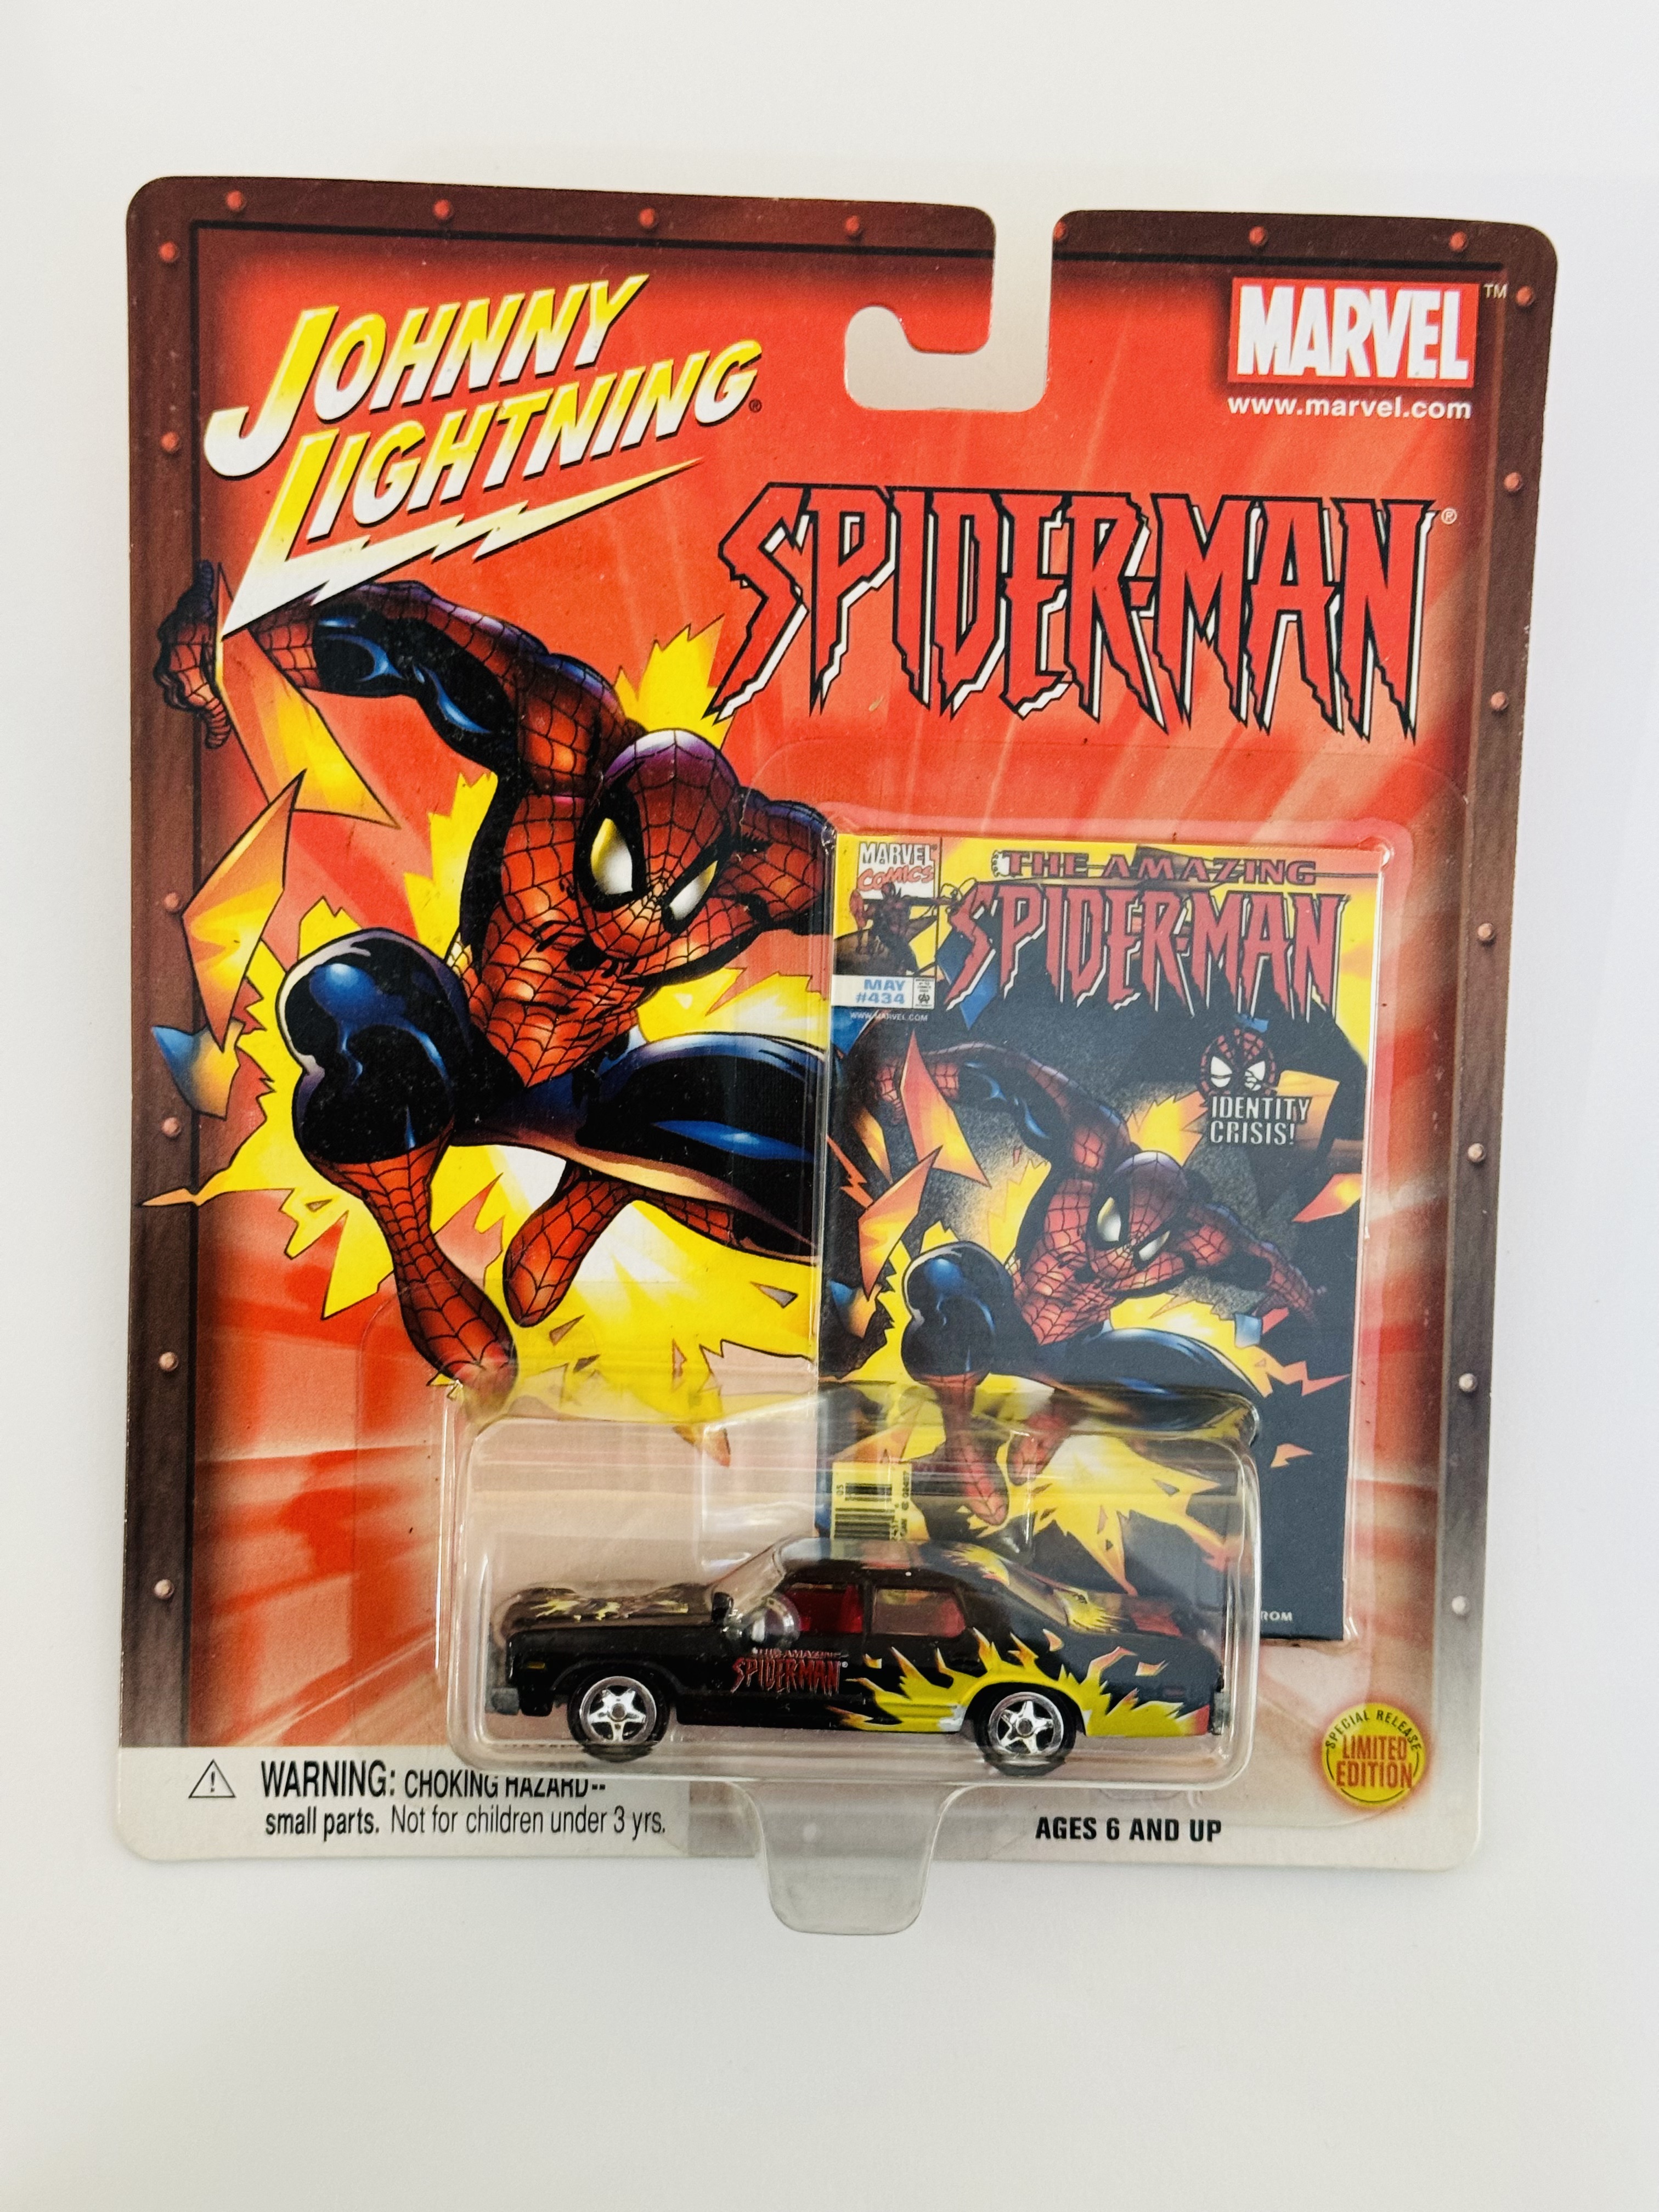 Johnny Lightning Spider-Man Identity Crisis Limited Edition Special Release